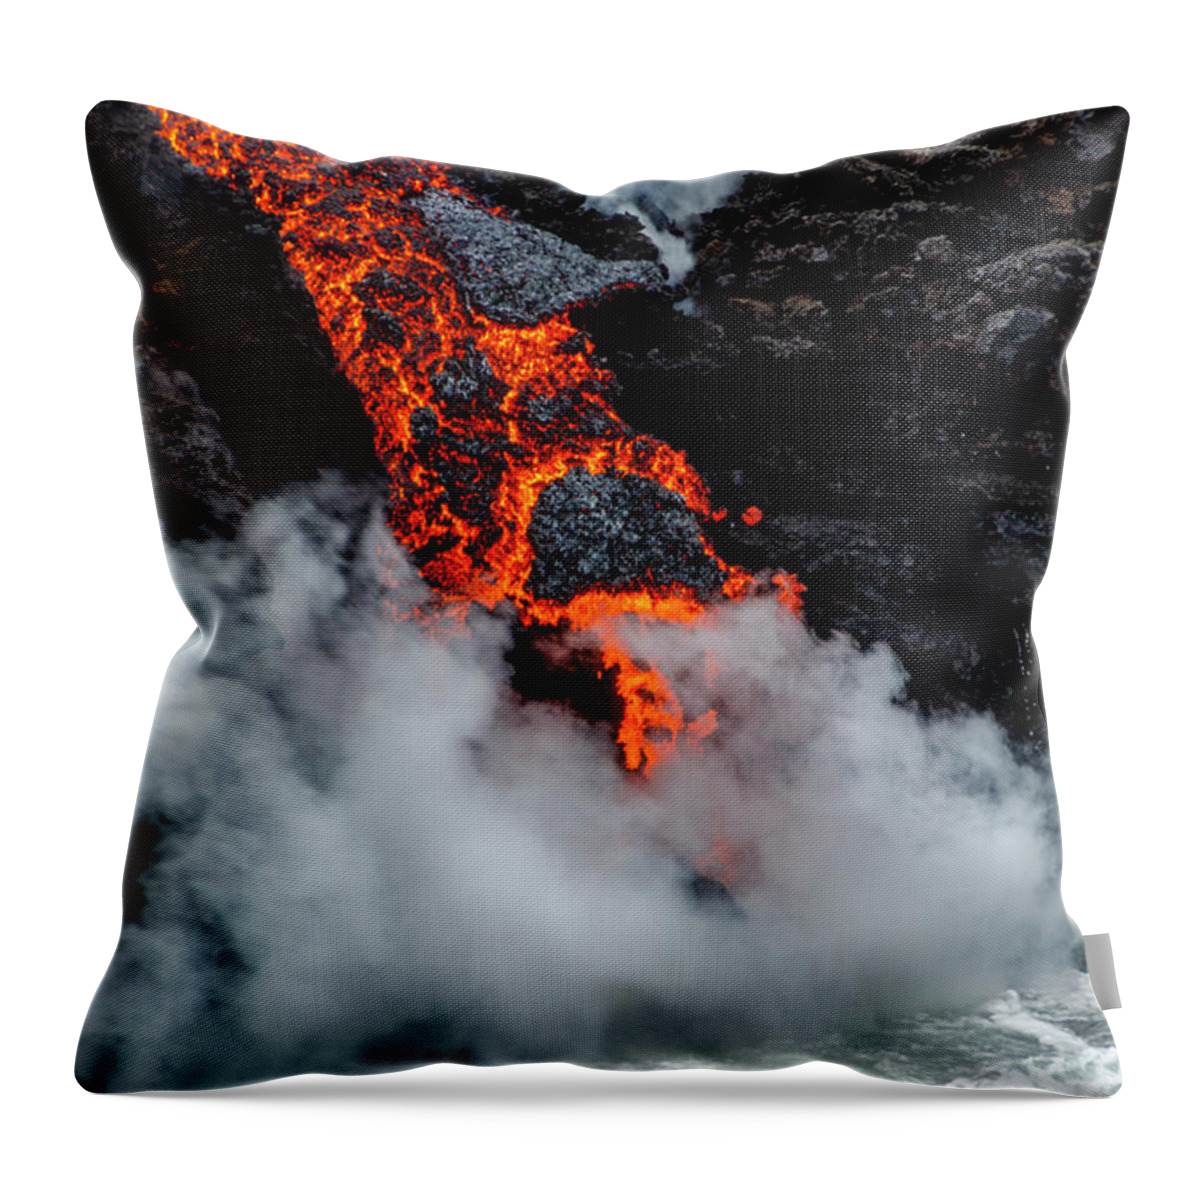 Lava Throw Pillow featuring the photograph Lava Train by Daniel Murphy